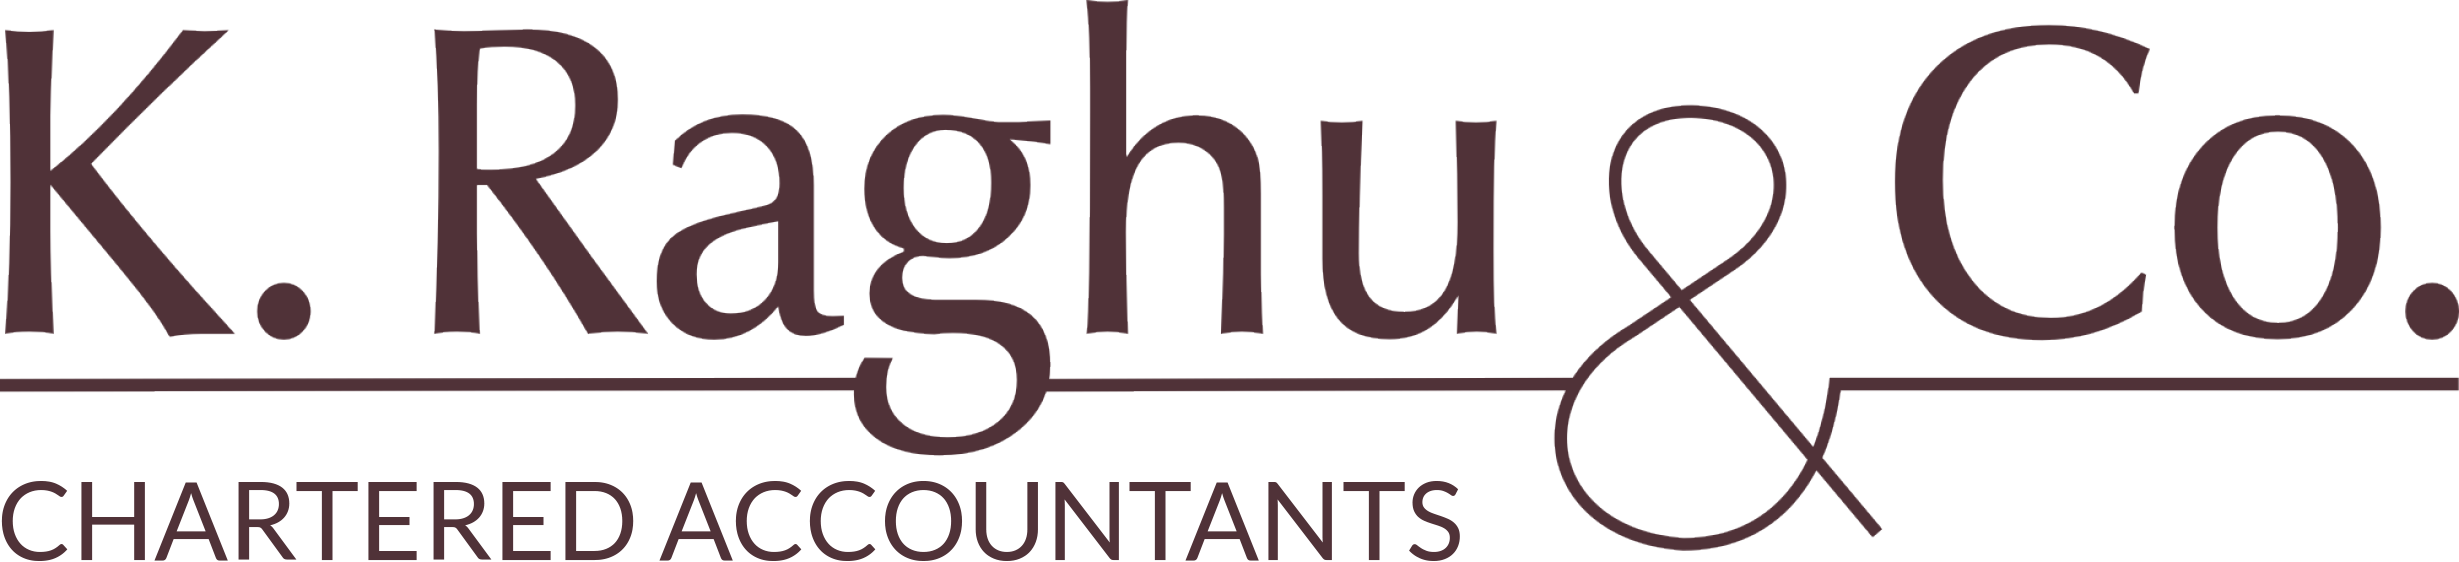 K. Raghu & Co - Chartered Accountants|IT Services|Professional Services